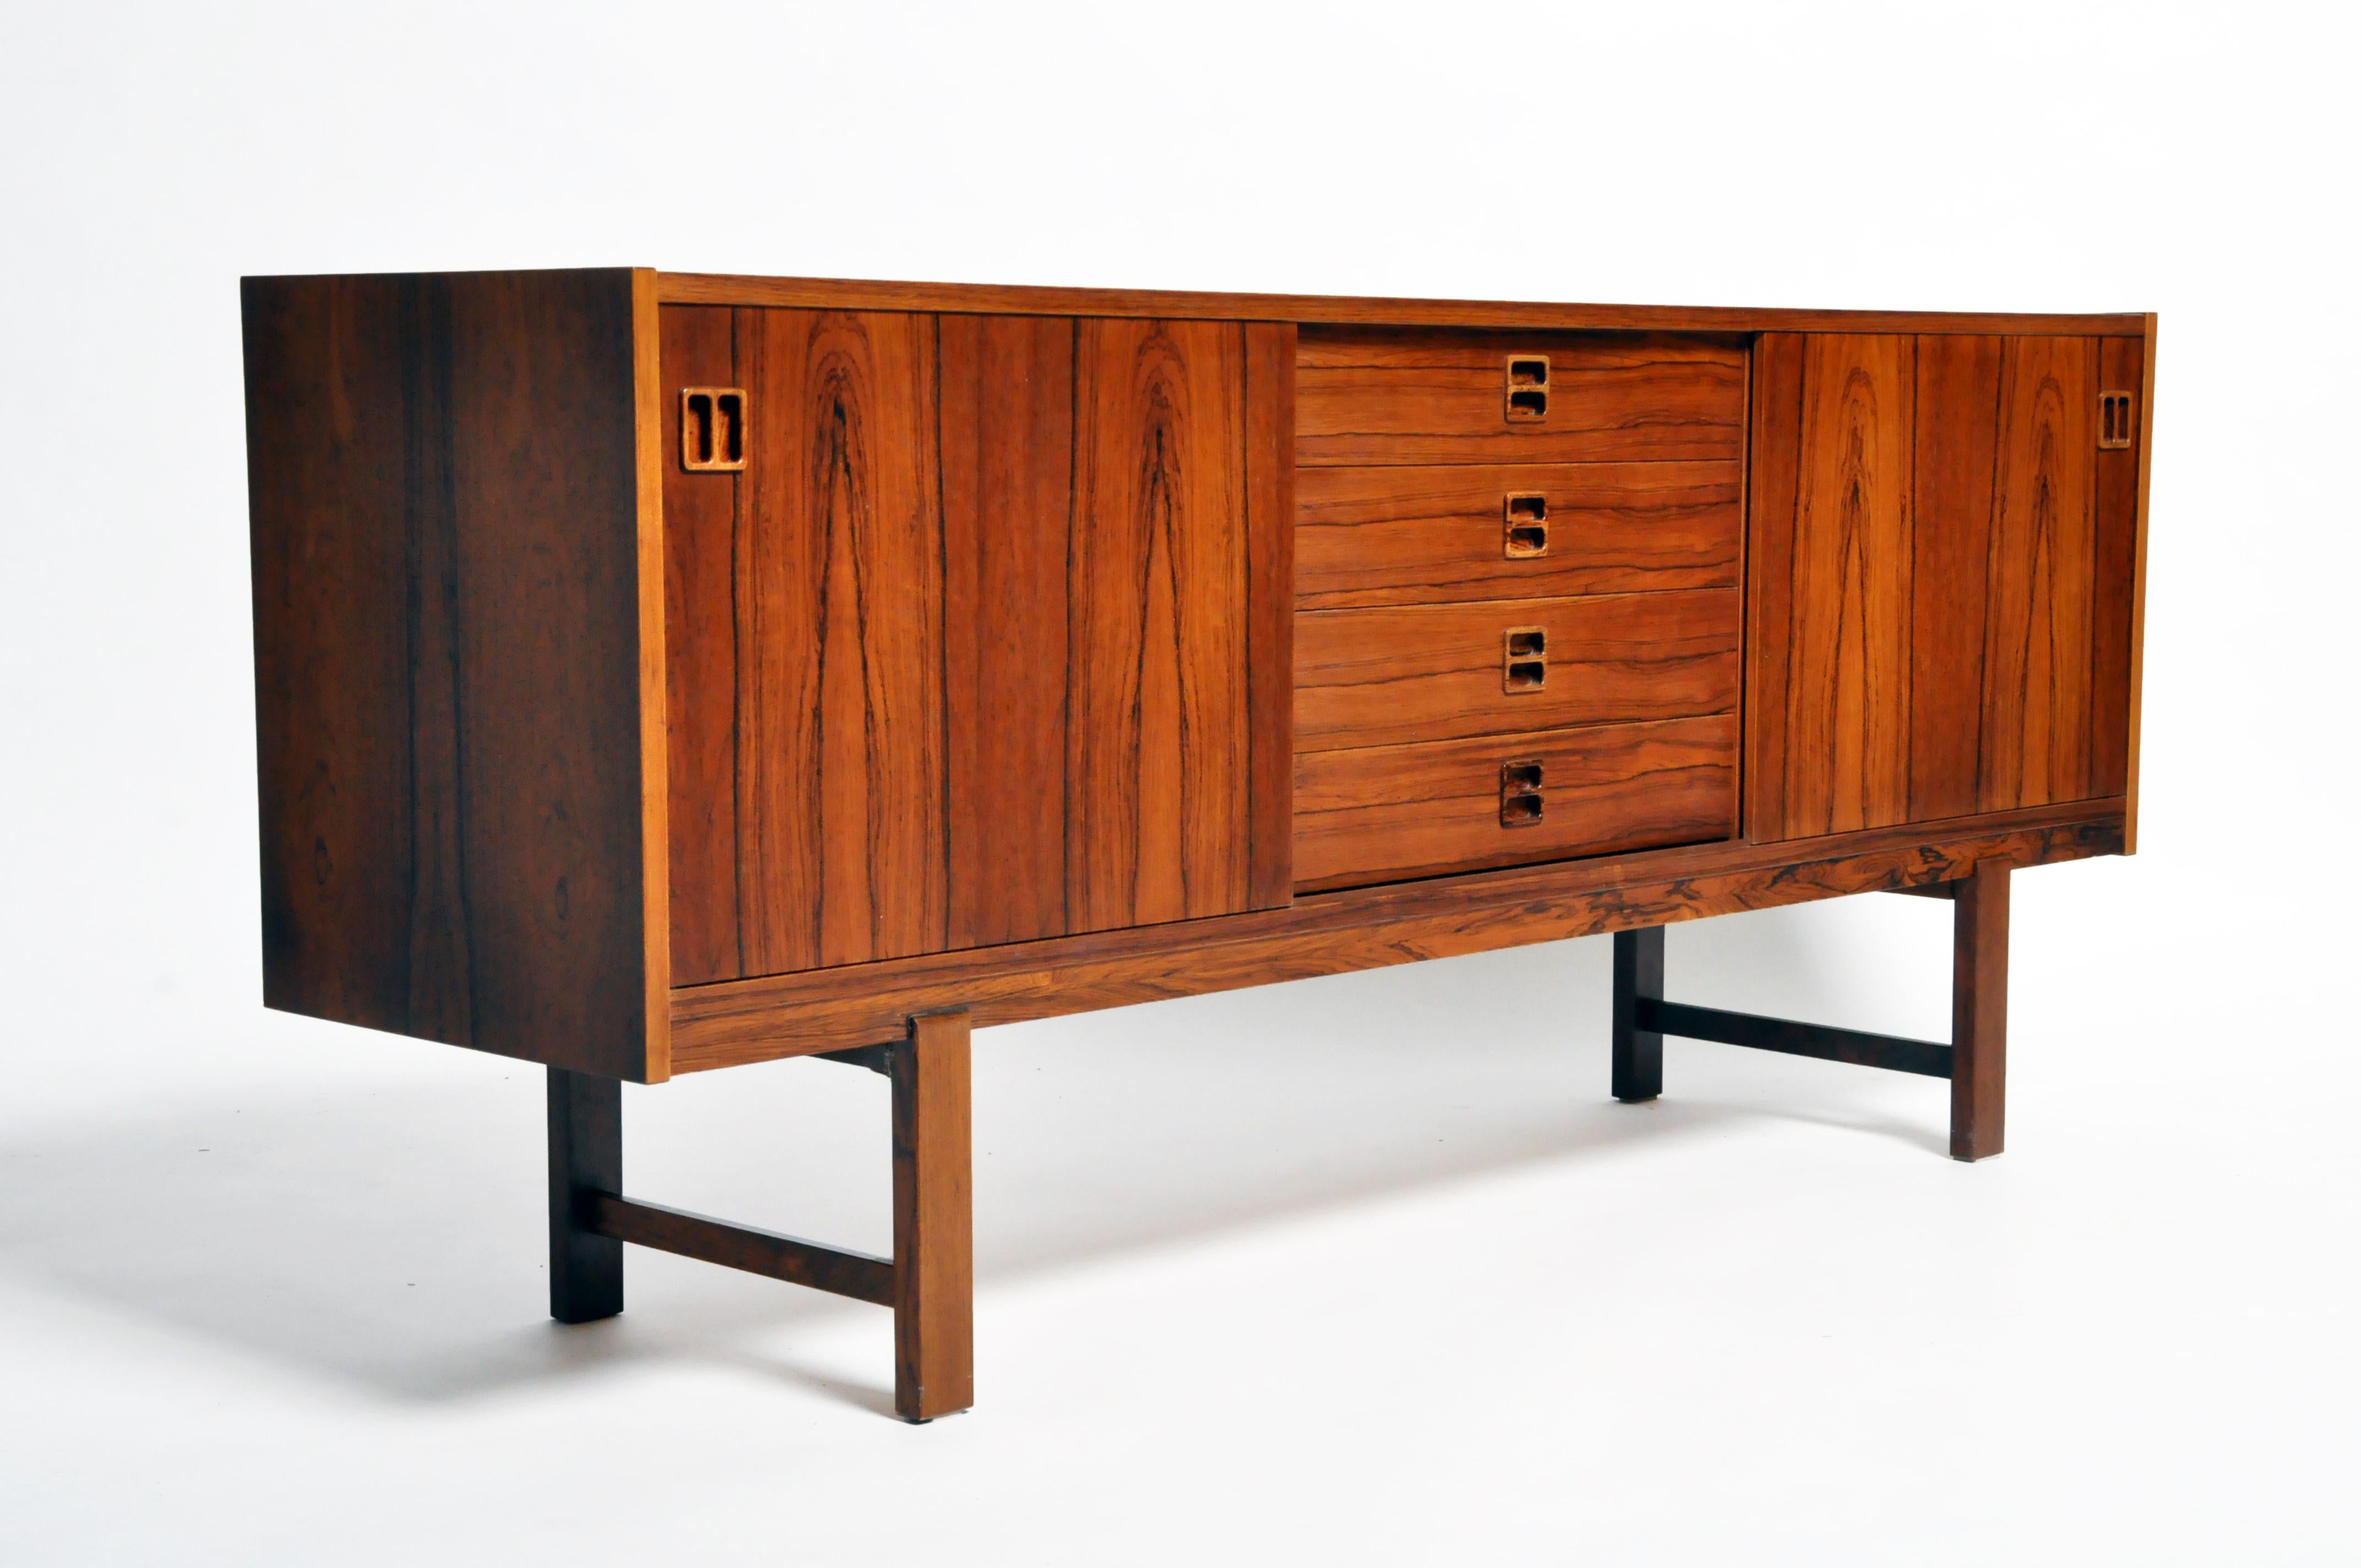 This handsome Mid-Century Modern sideboard is from Denmark and made from walnut veneer, circa 1960. The piece features 4 drawers and 2 sliding doors that open up to shelves for additional storage.